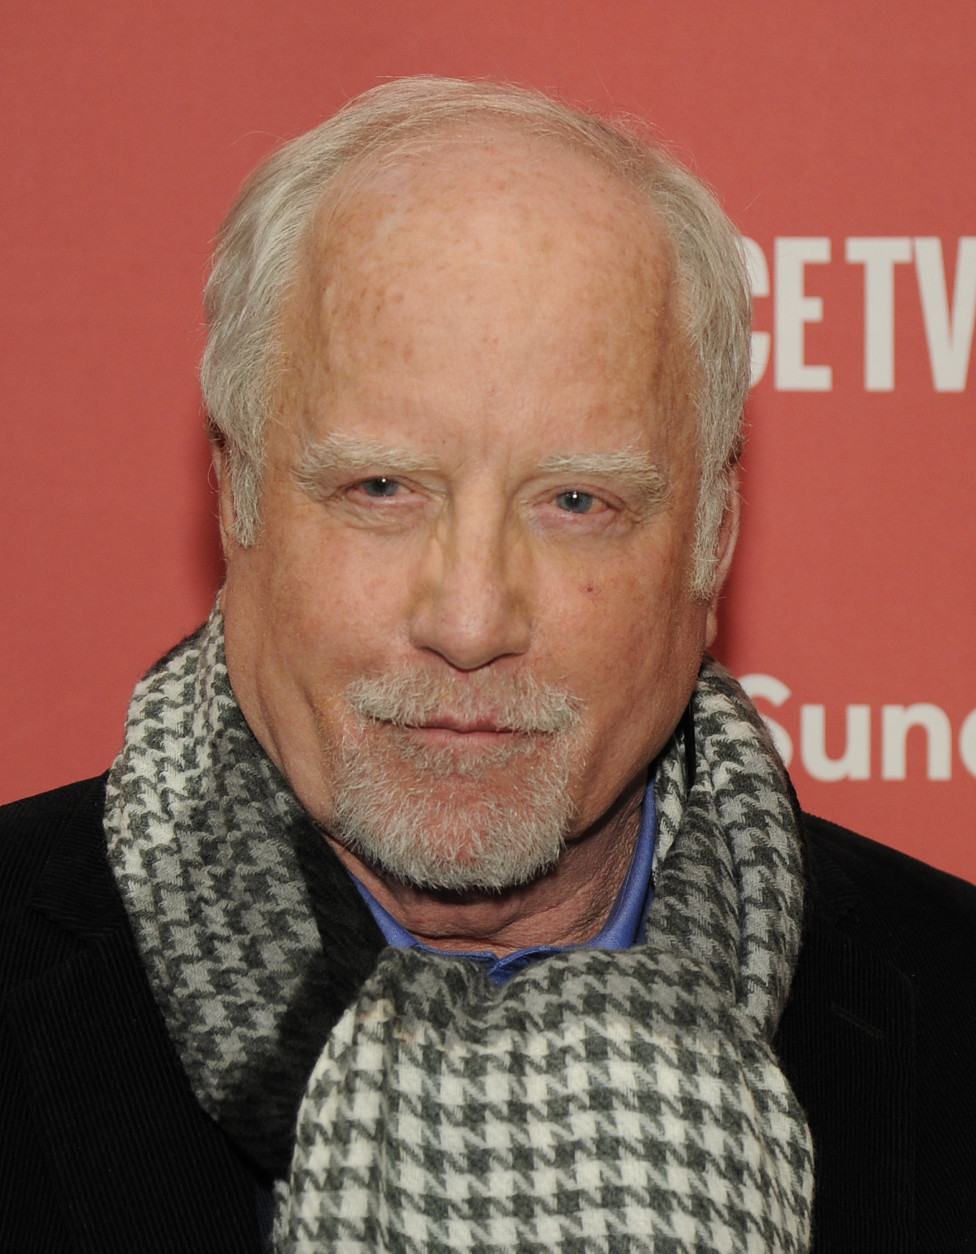 Richard Dreyfuss, a cast member in "Zipper," poses at the premiere of the film at the Eccles Theatre during the 2015 Sundance Film Festival on Tuesday, Jan. 27, 2015, in Park City, Utah. (Photo by Chris Pizzello/Invision/AP)